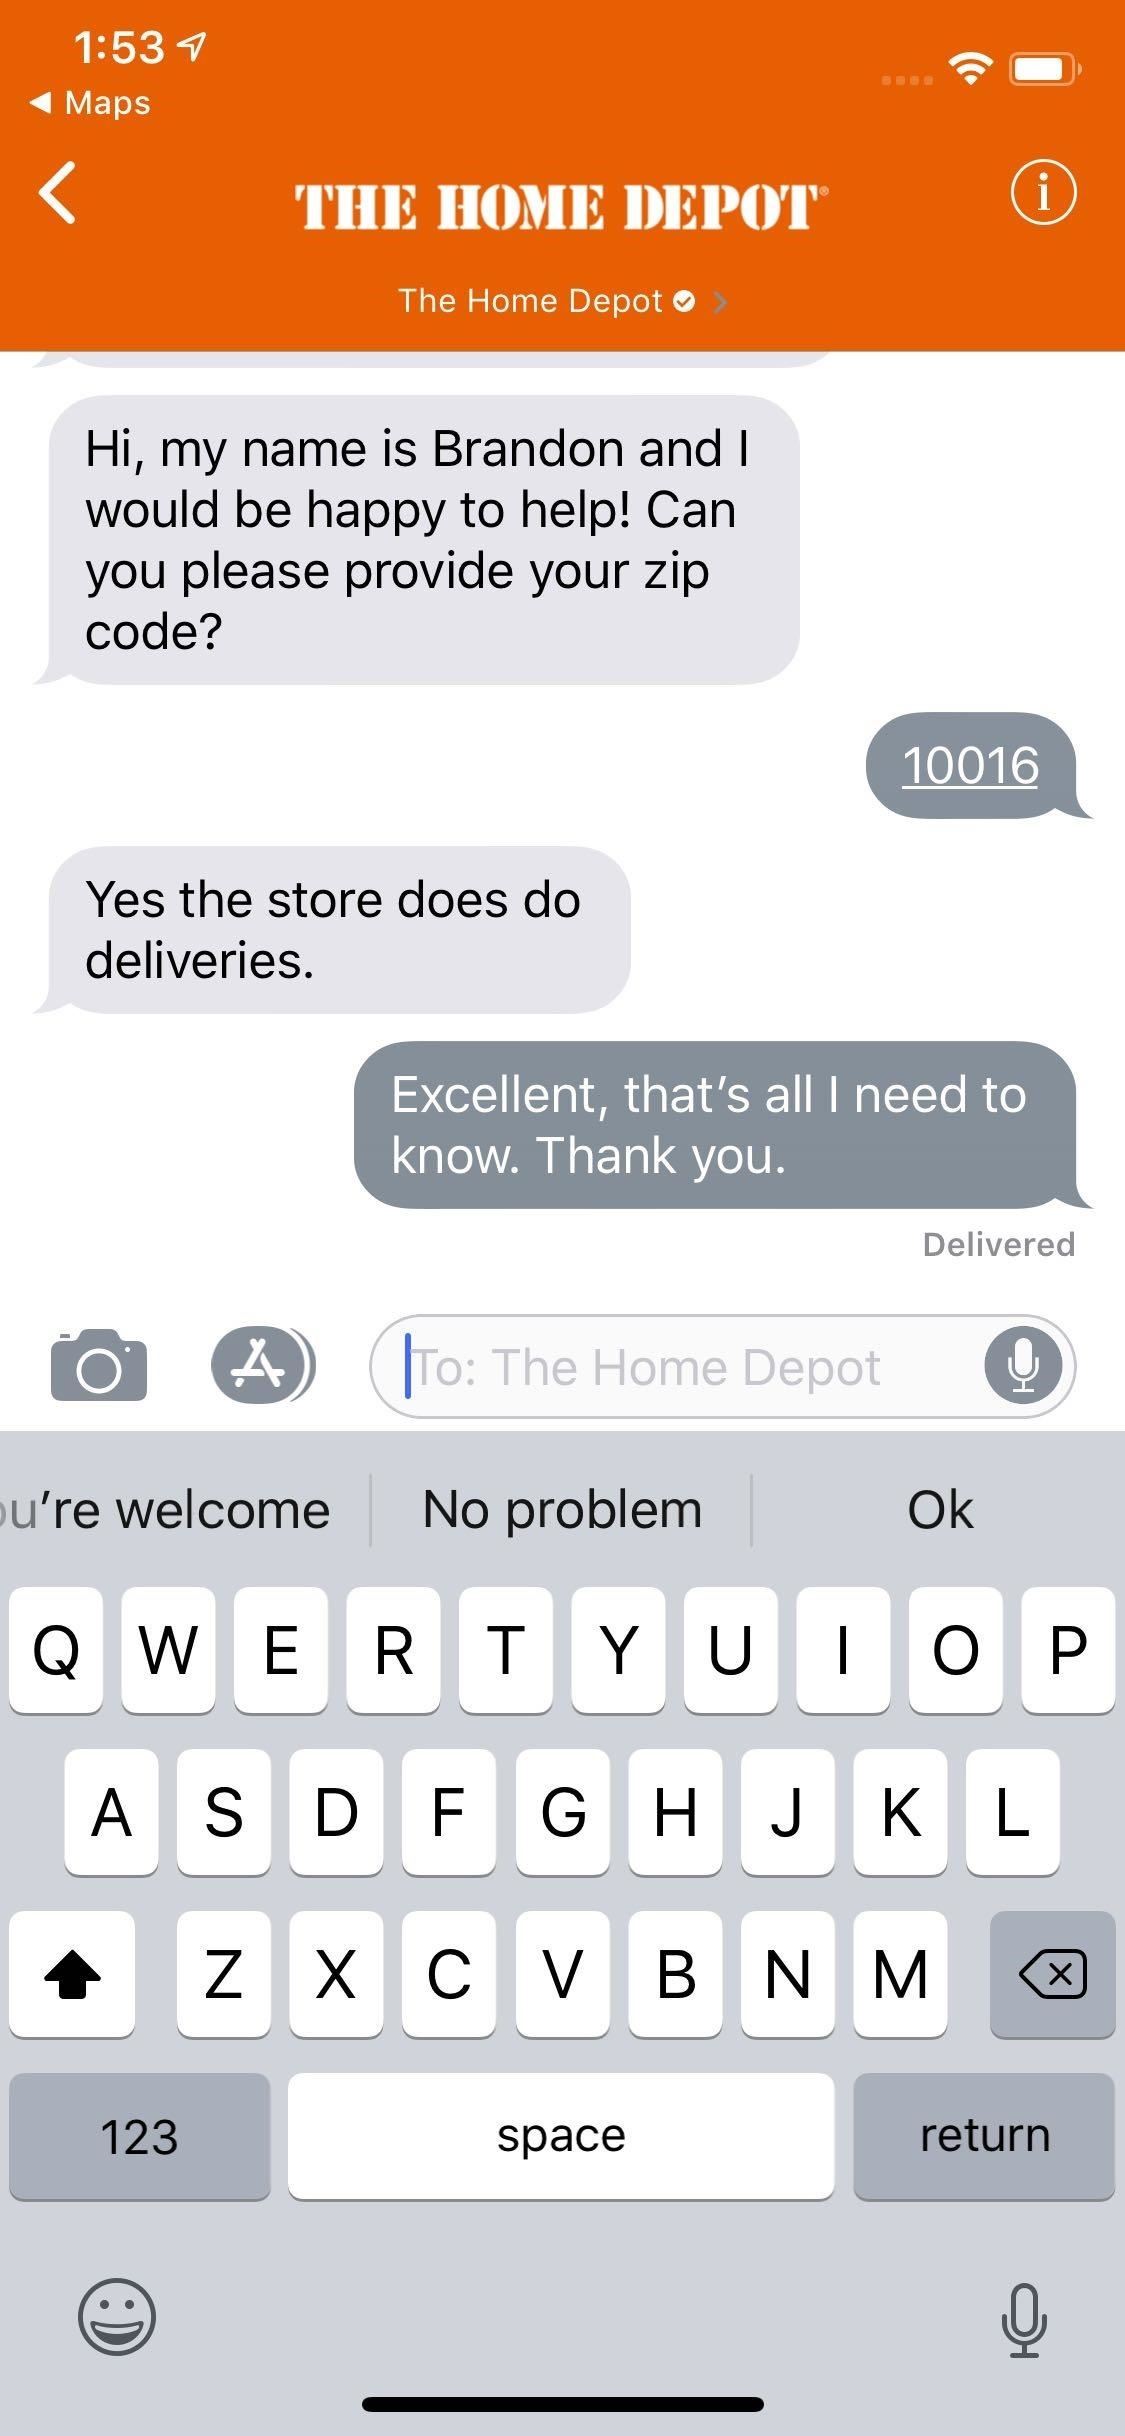 Google Is Taking on Apple's iMessage with RCS — Here's How Android's New Texting Experience Stacks Up